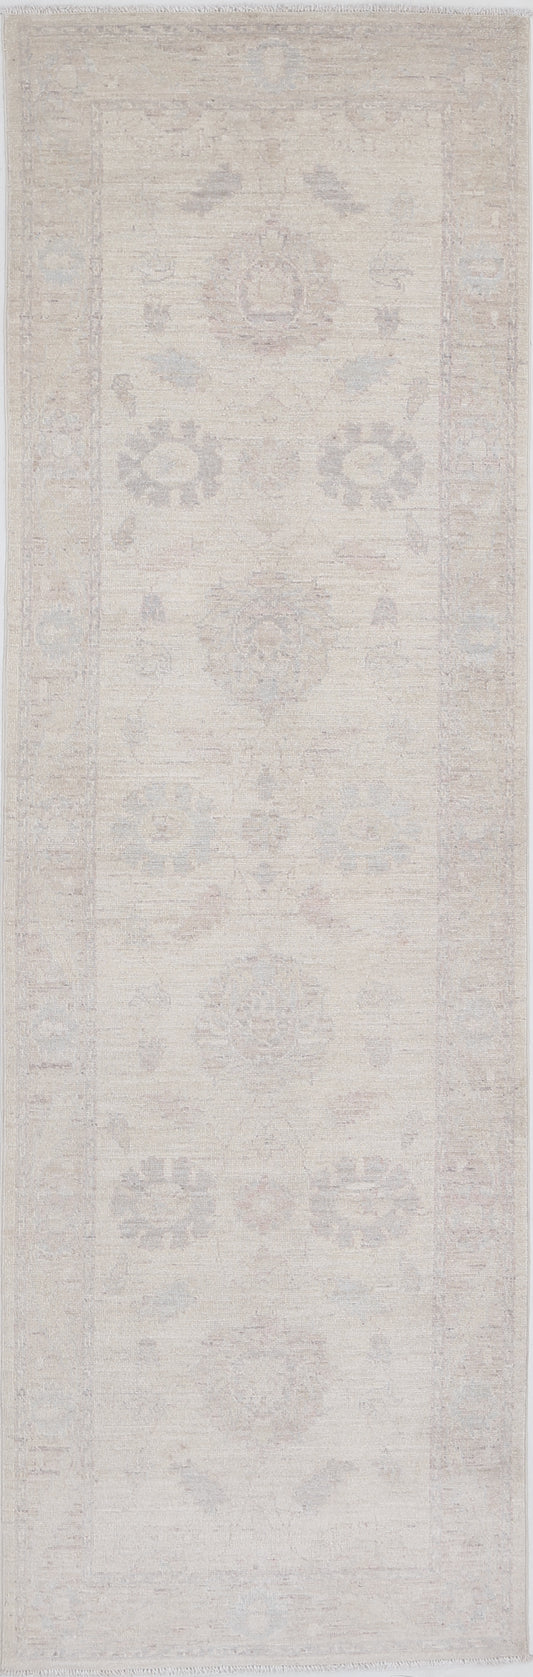 Traditional Hand Knotted Serenity Farhan Wool Rug of Size 2'6'' X 8'6'' in Ivory and Brown Colors - Made in Afghanistan